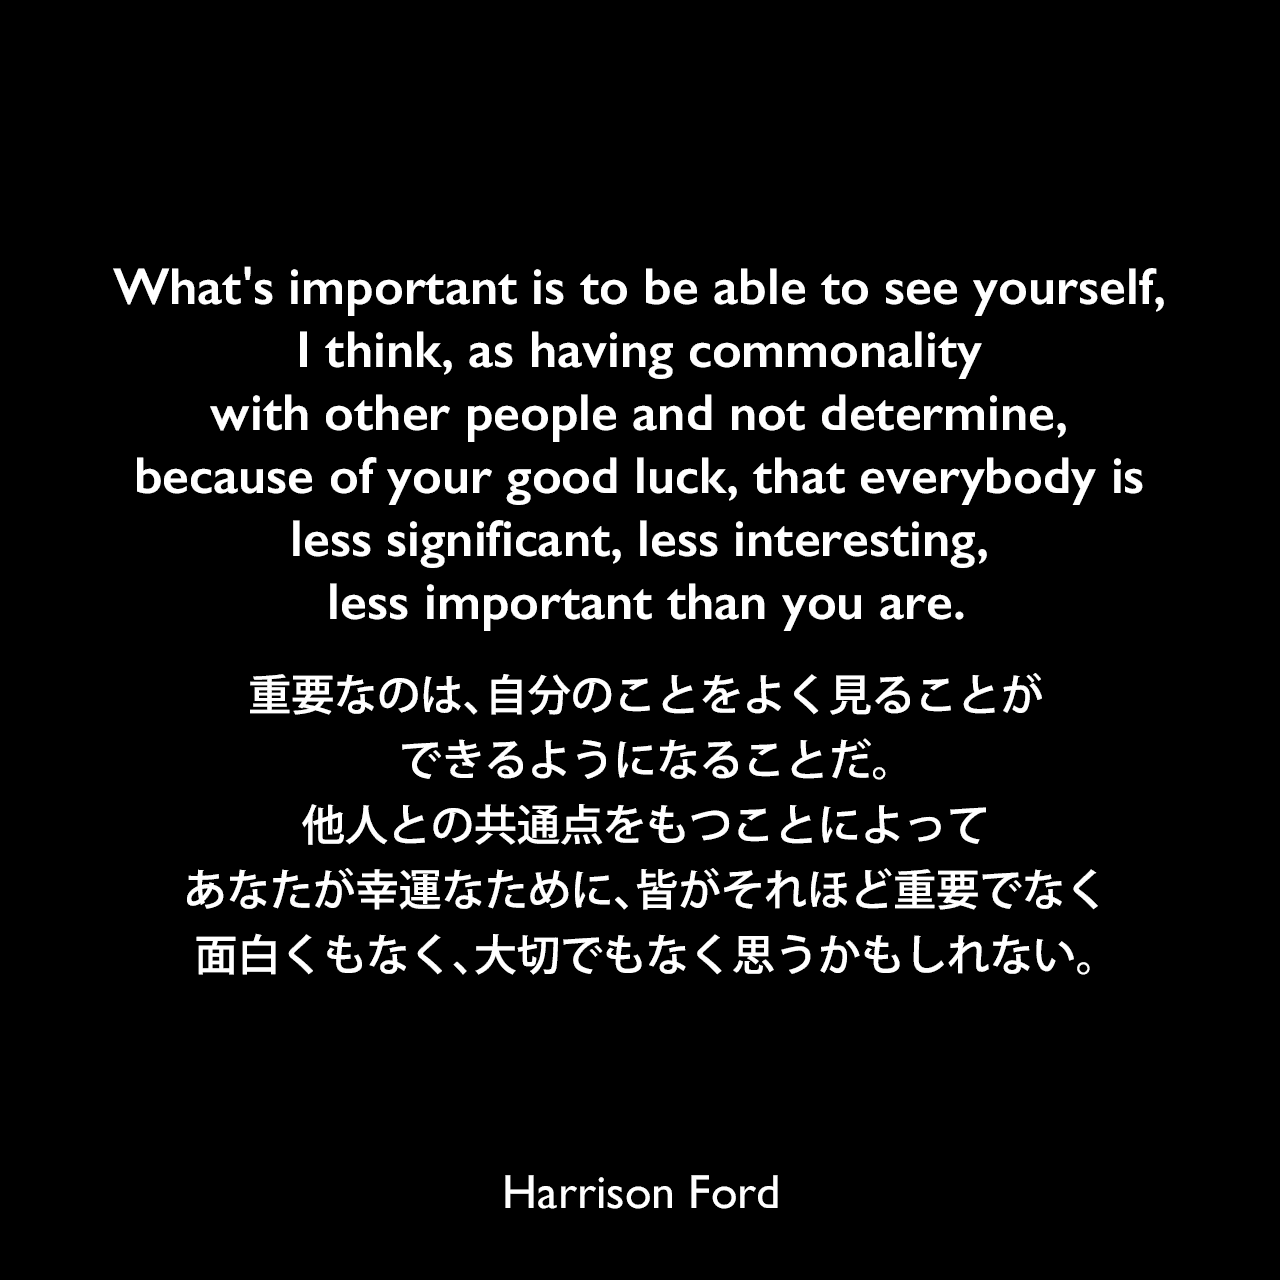 What's important is to be able to see yourself, I think, as having commonality with other people and not determine, because of your good luck, that everybody is less significant, less interesting, less important than you are.重要なのは、自分のことをよく見ることができるようになることだ。他人との共通点をもつことによって、あなたが幸運なために、皆がそれほど重要でなく、面白くもなく、大切でもなく思うかもしれない。Harrison Ford